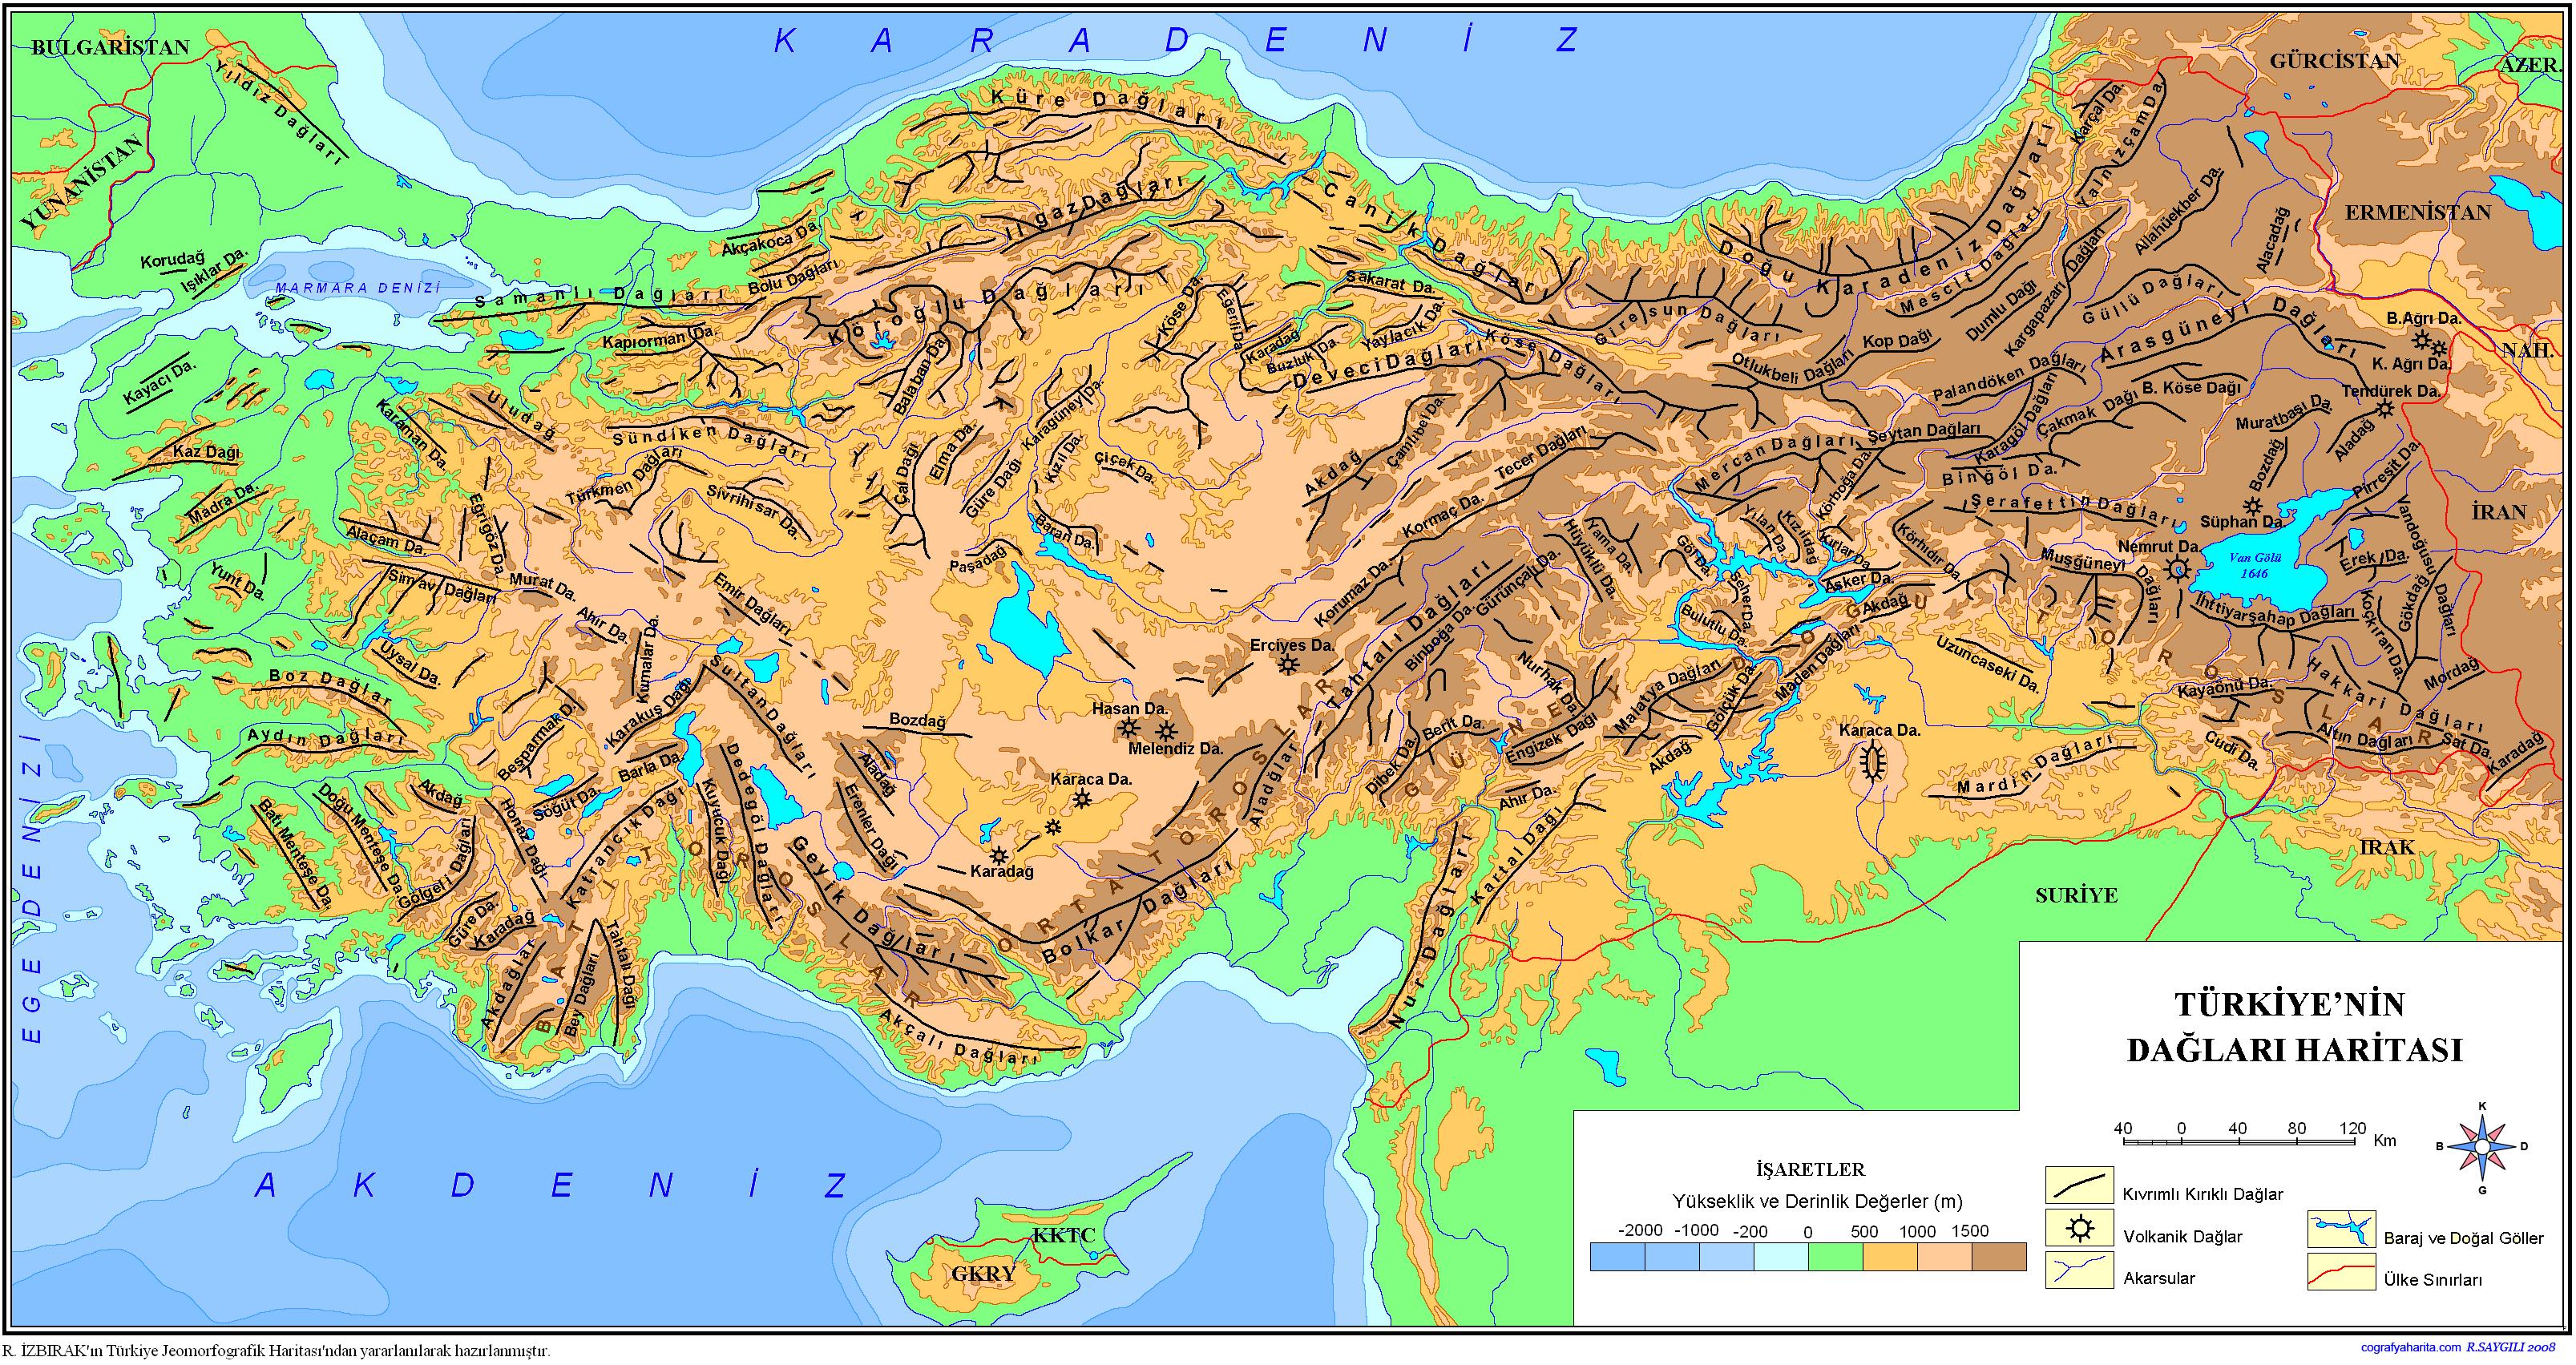 Geographical map of Turkey: topography and physical features of Turkey